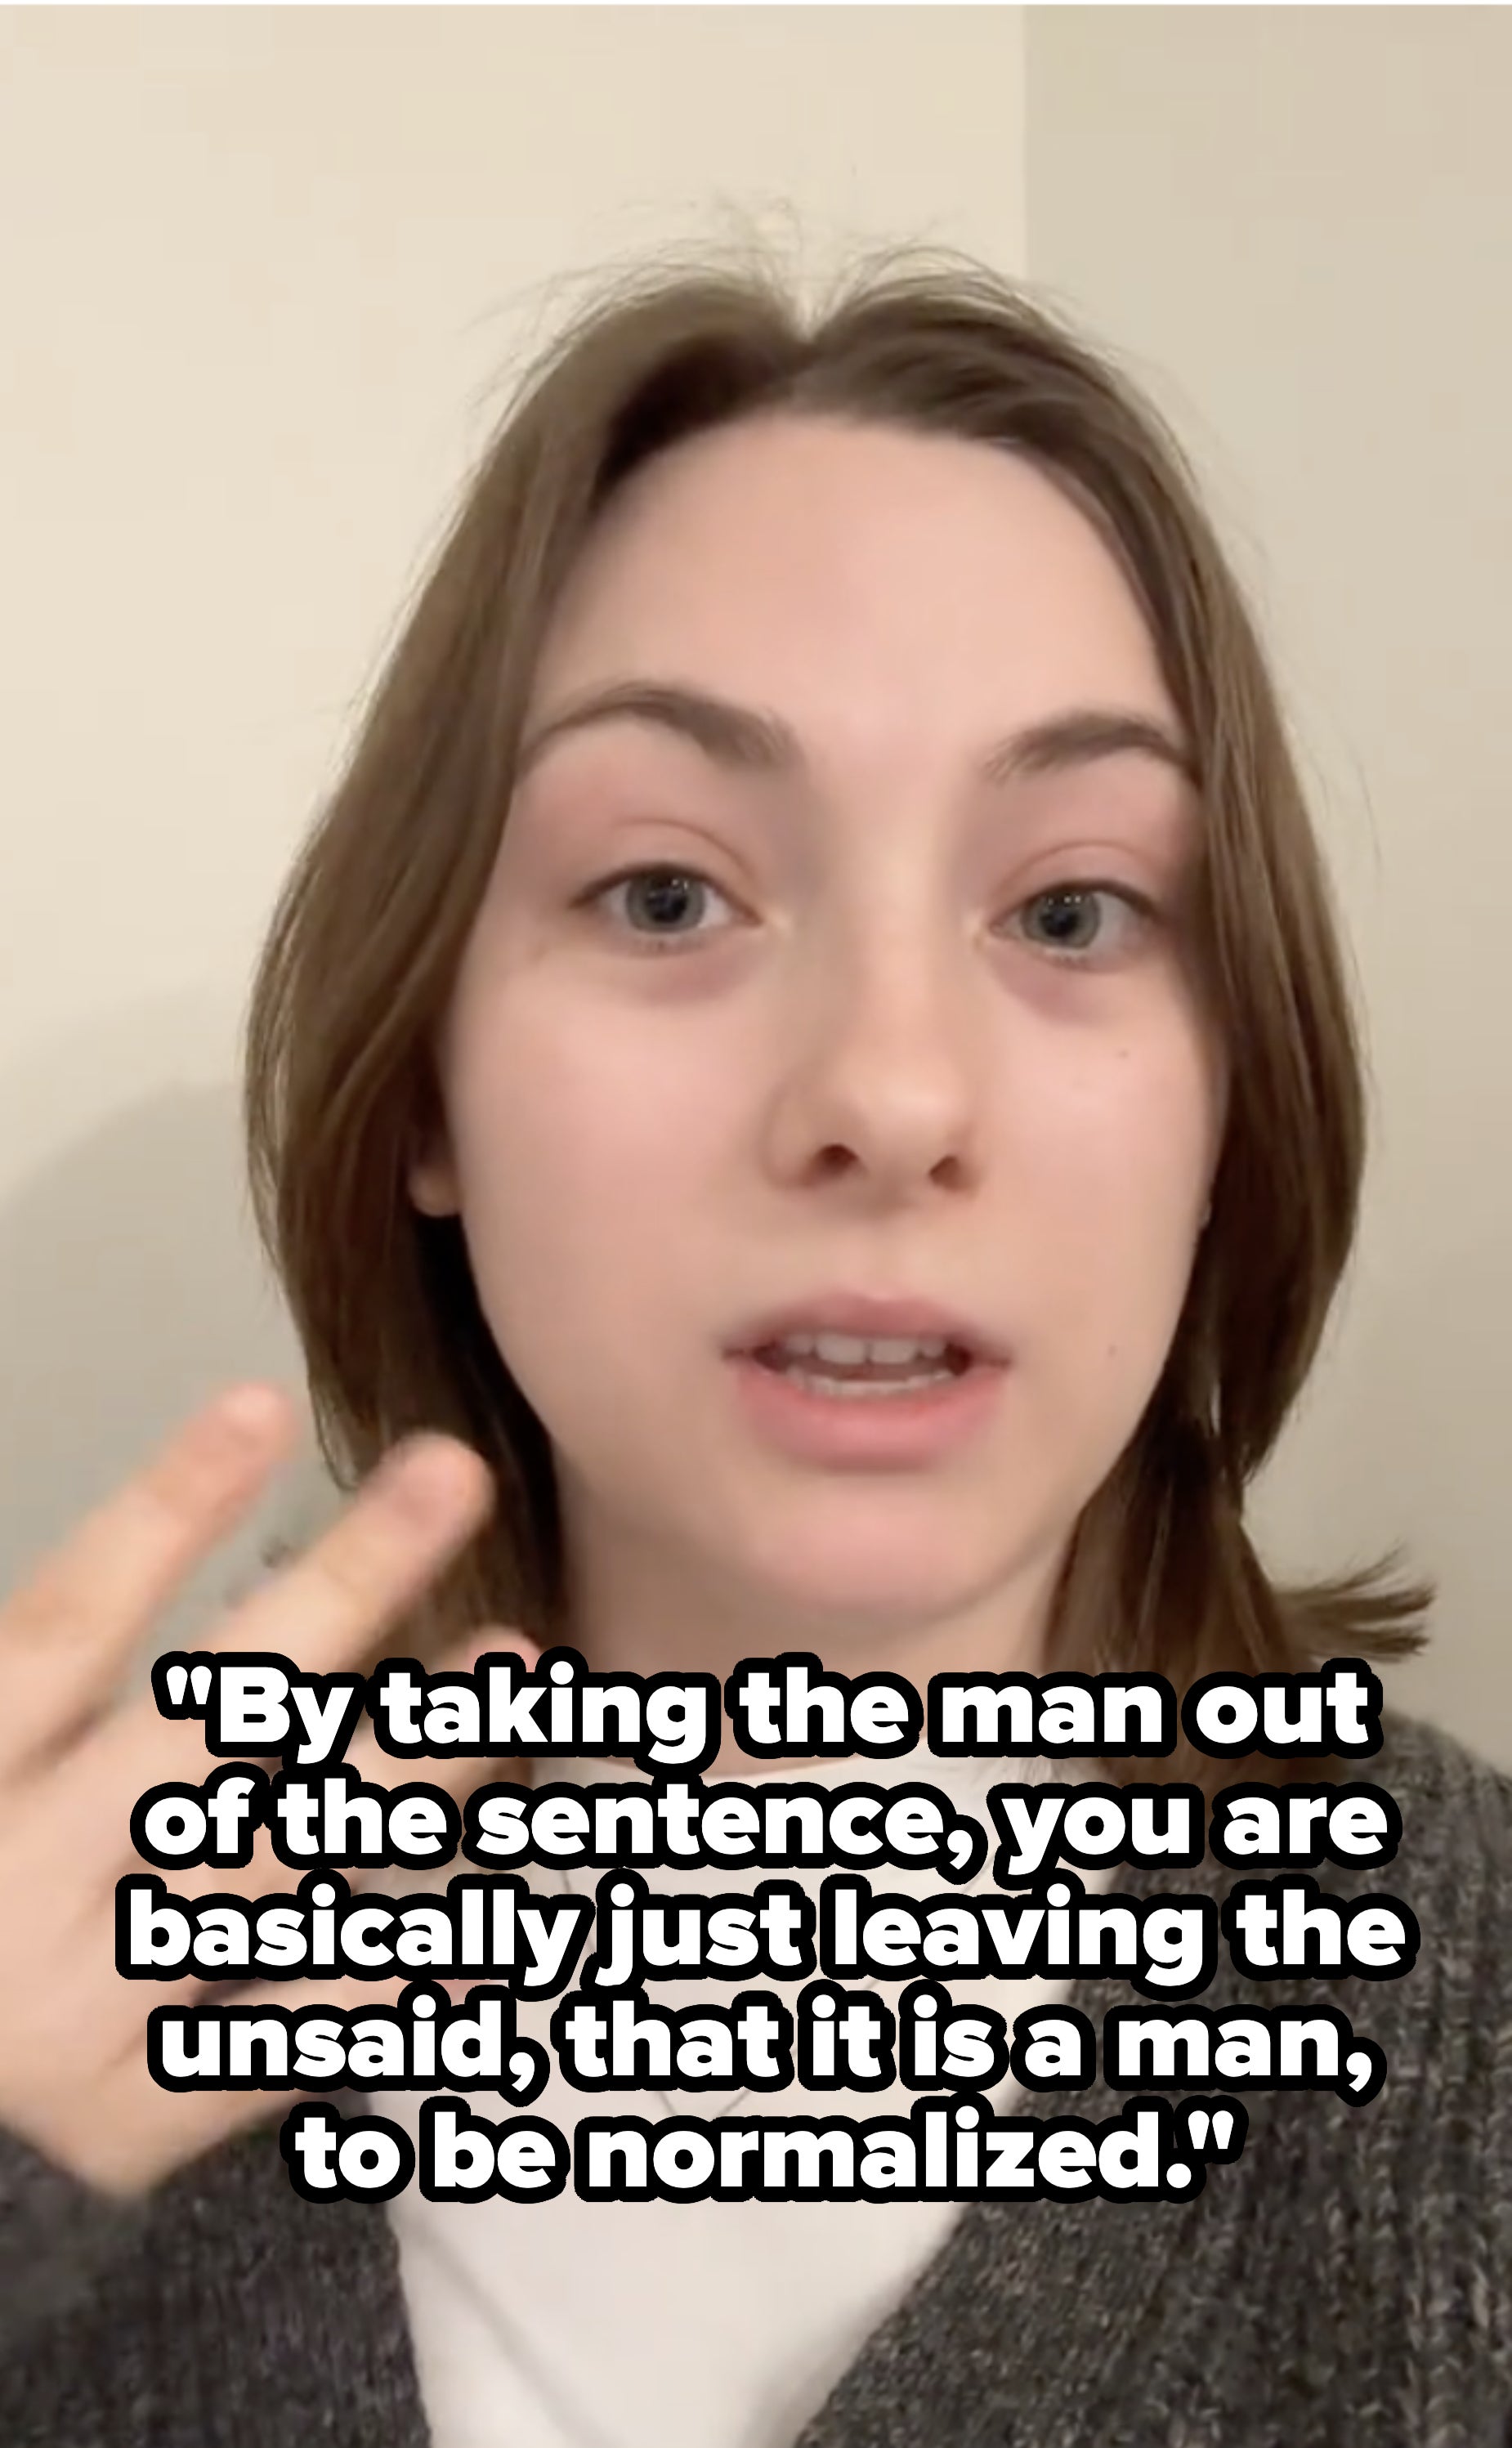 “microfeminism” is a new viral trend taking over tiktok, and thousands of women (and men) are partaking